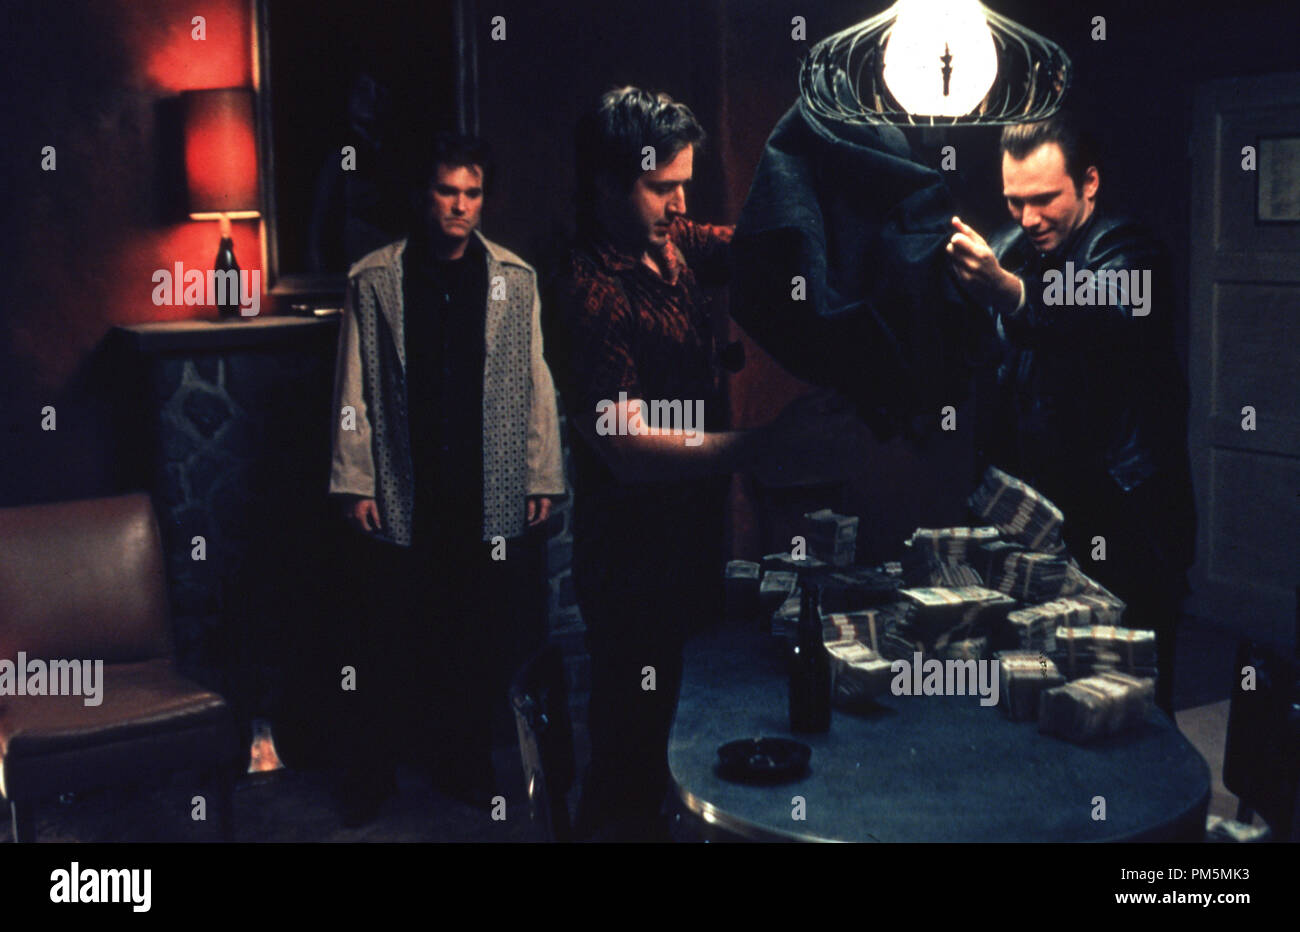 Film Still / Publicity Still from 'Three Thousand Miles to Graceland' Kurt Russell, David Arquette, Christian Slater © 2001 Warner Brothers Photo credit: Alan Markfield File Reference # 30847054THA  For Editorial Use Only -  All Rights Reserved Stock Photo